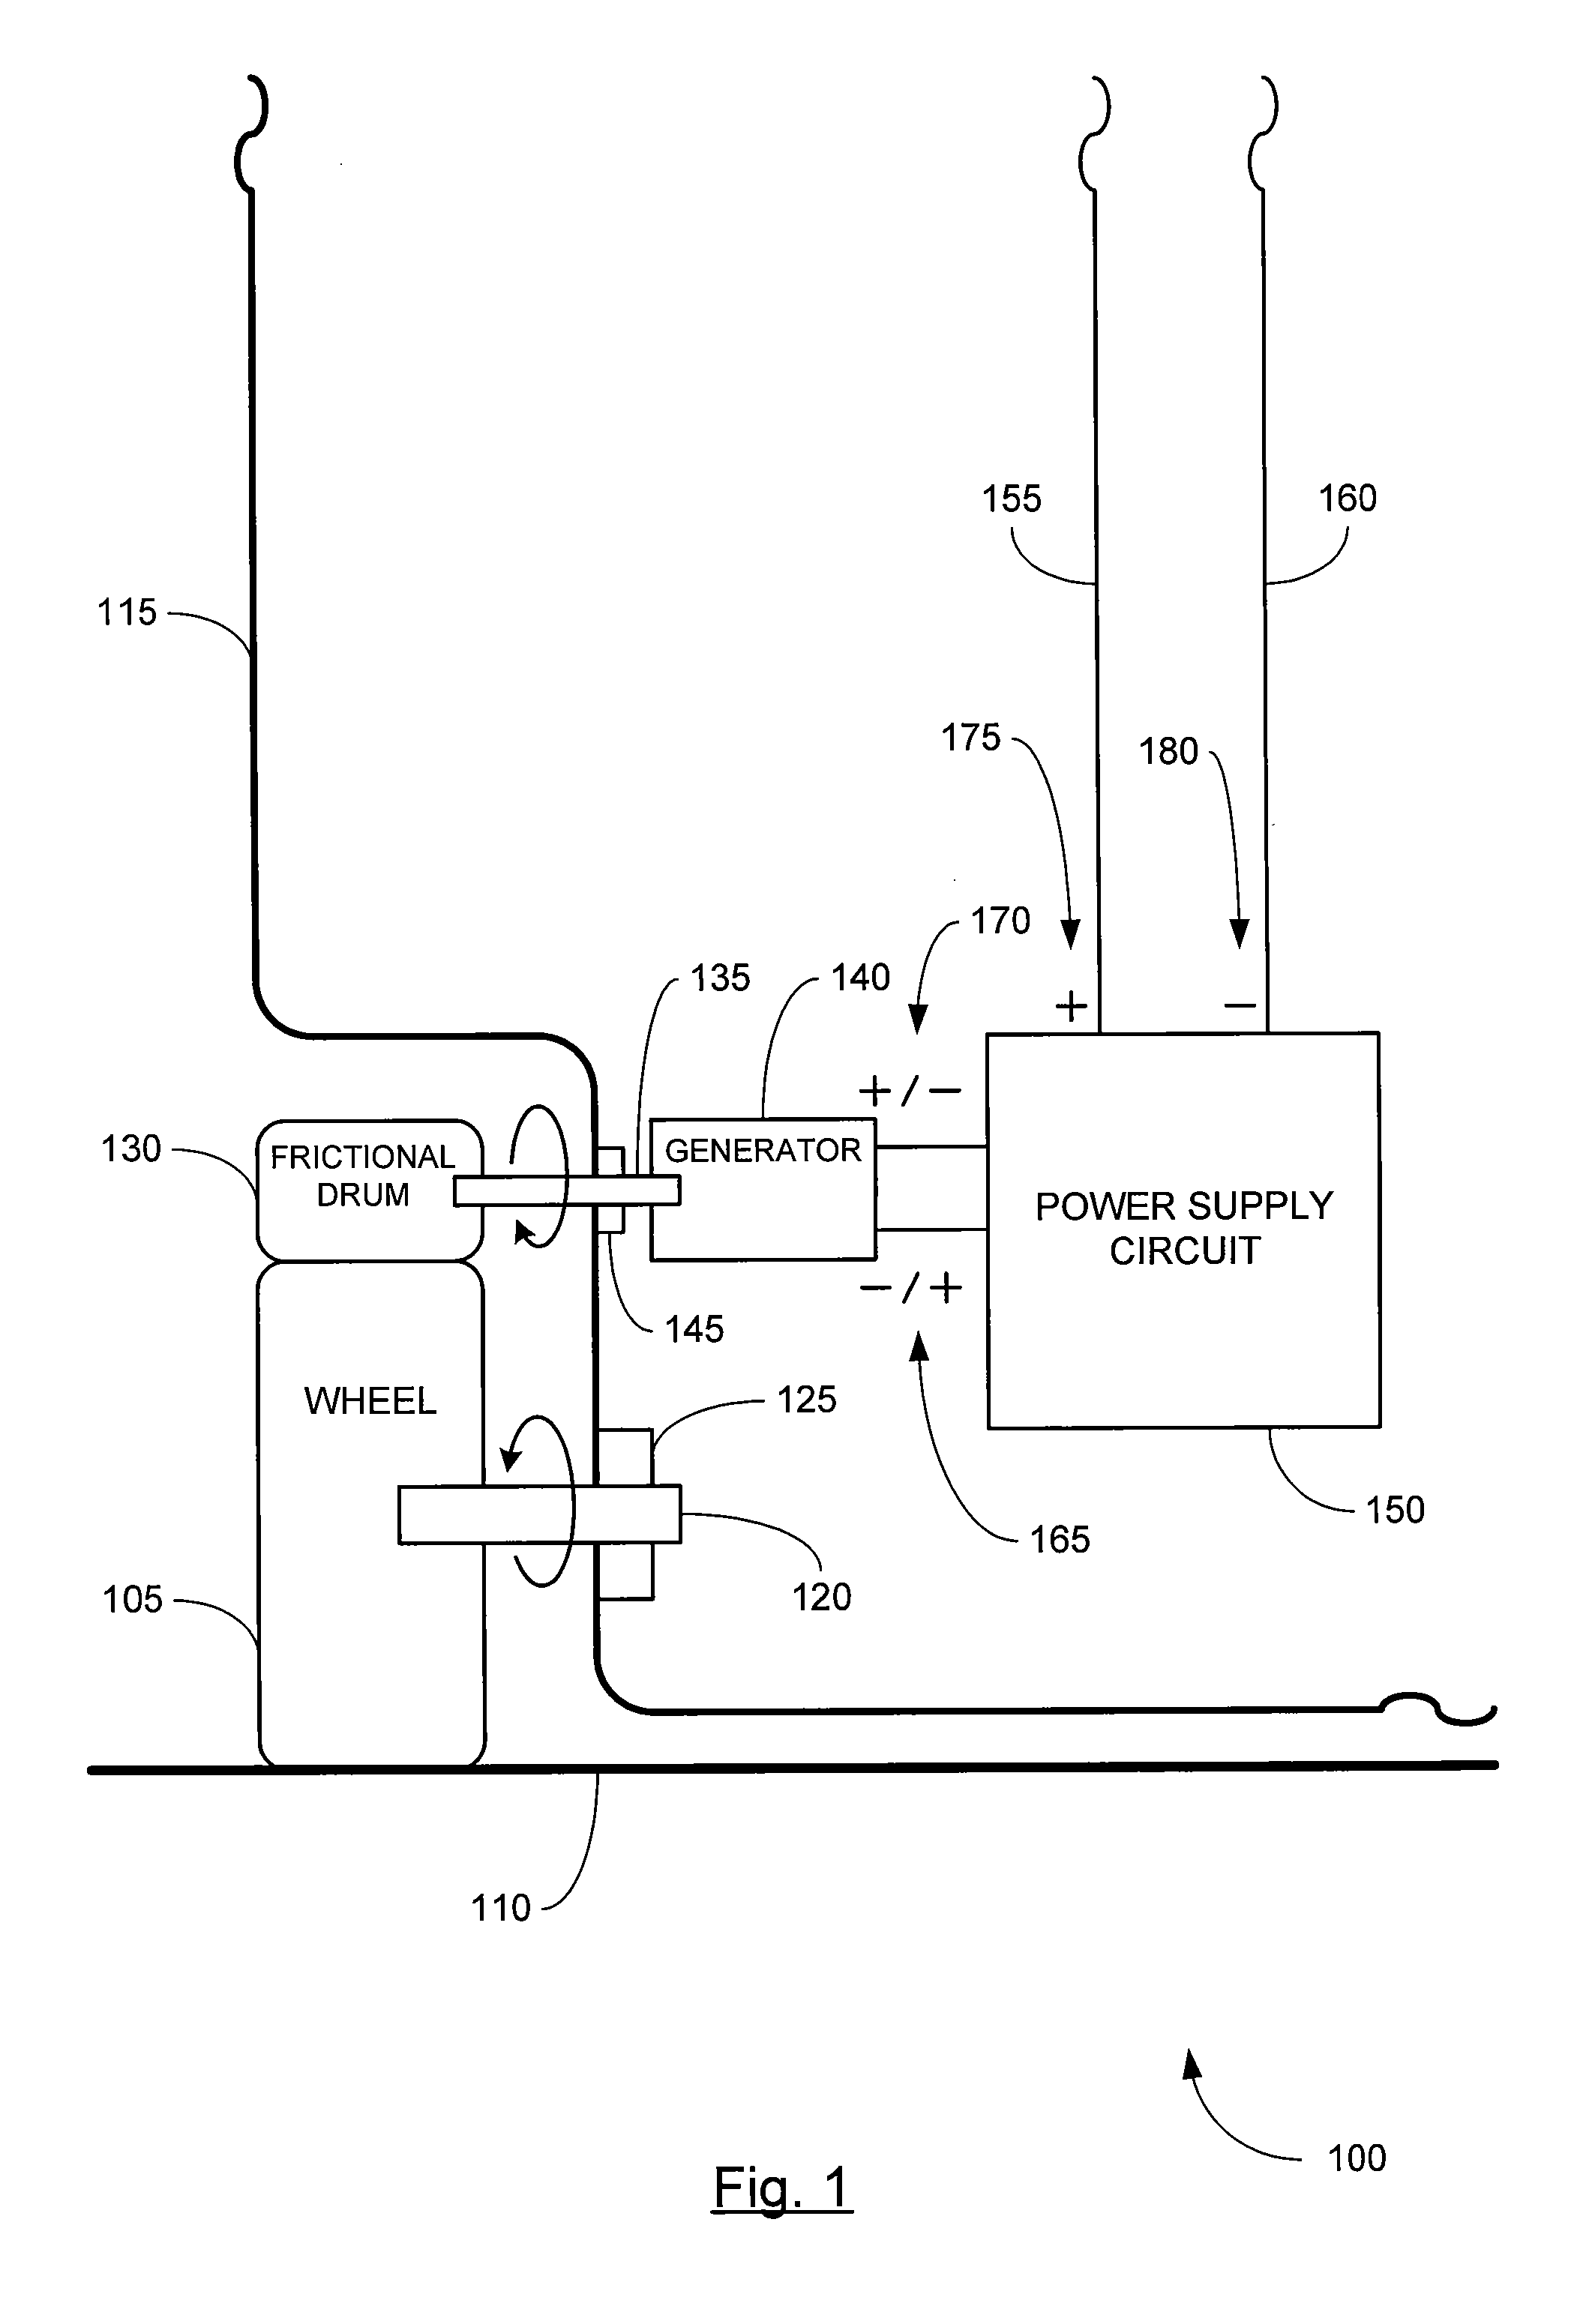 Luggage with Power Supply Circuit